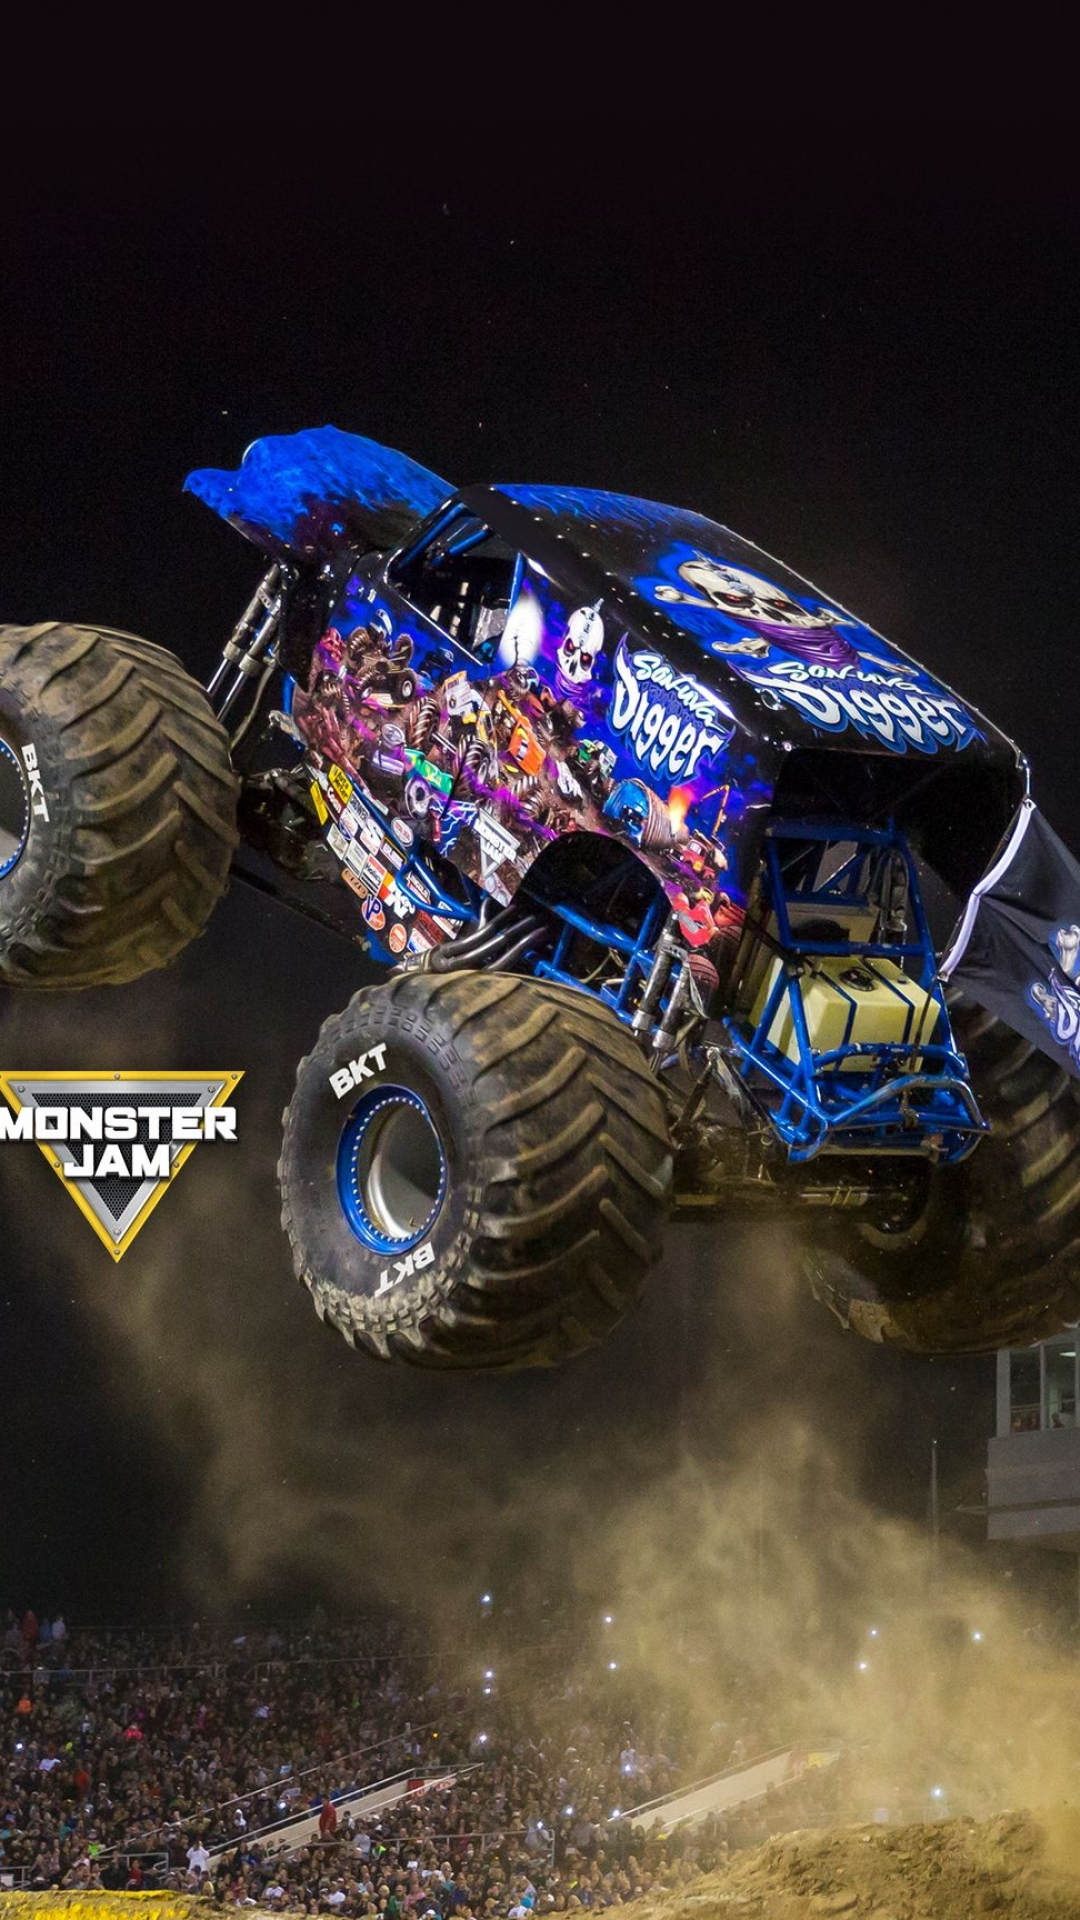 Monster Truck: A live motorsport event tour, Events around the U.S. and Canada, Freestyle. 1080x1920 Full HD Wallpaper.